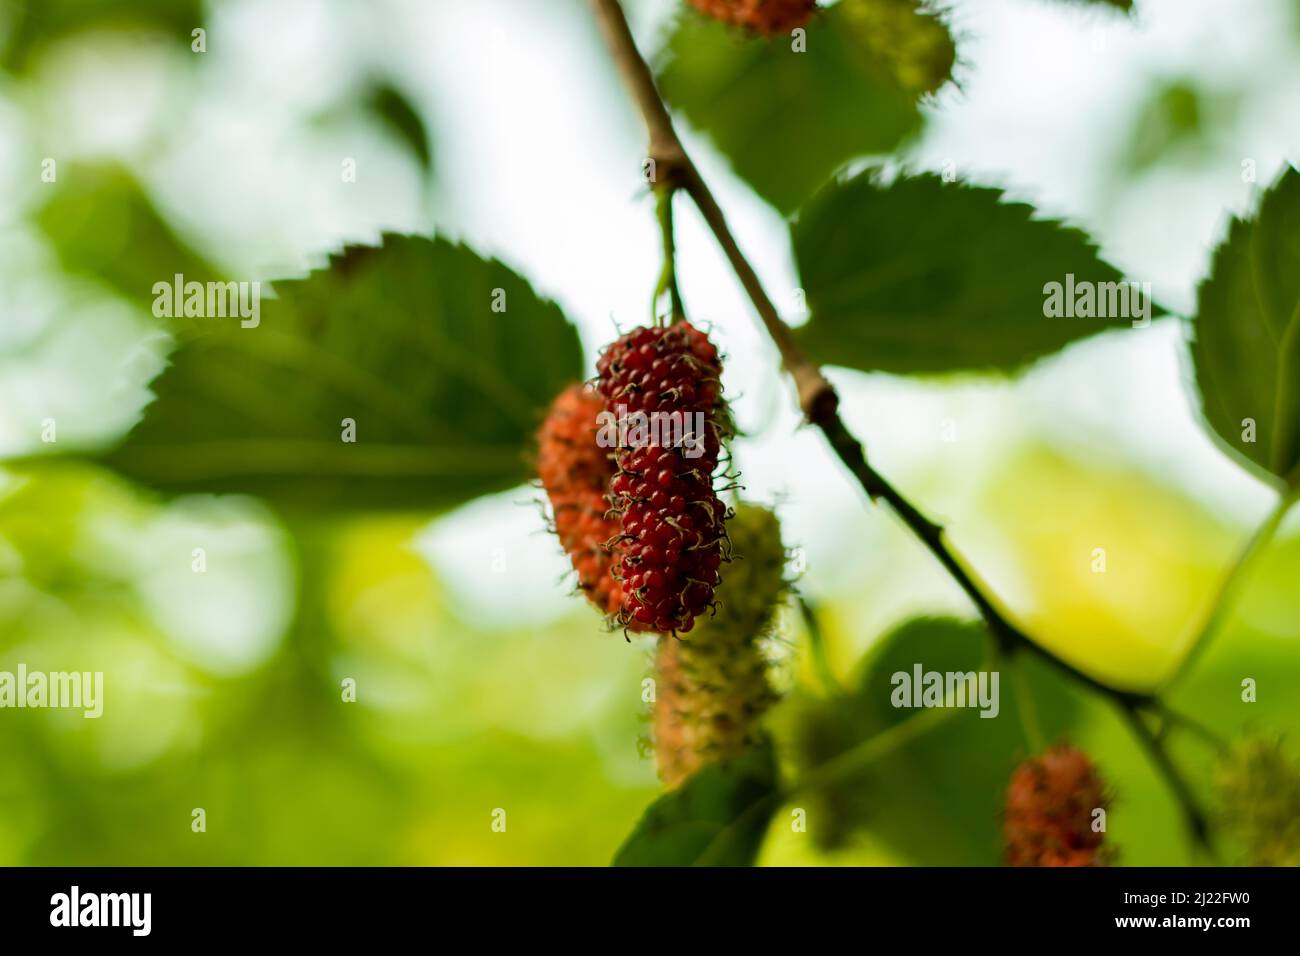 Silkworm Mulberry, Russian Mulberry, White Mulberry, or Morus alba, Also known as Mori folium when used as herbal medicine and It's is a fast-growing Stock Photo